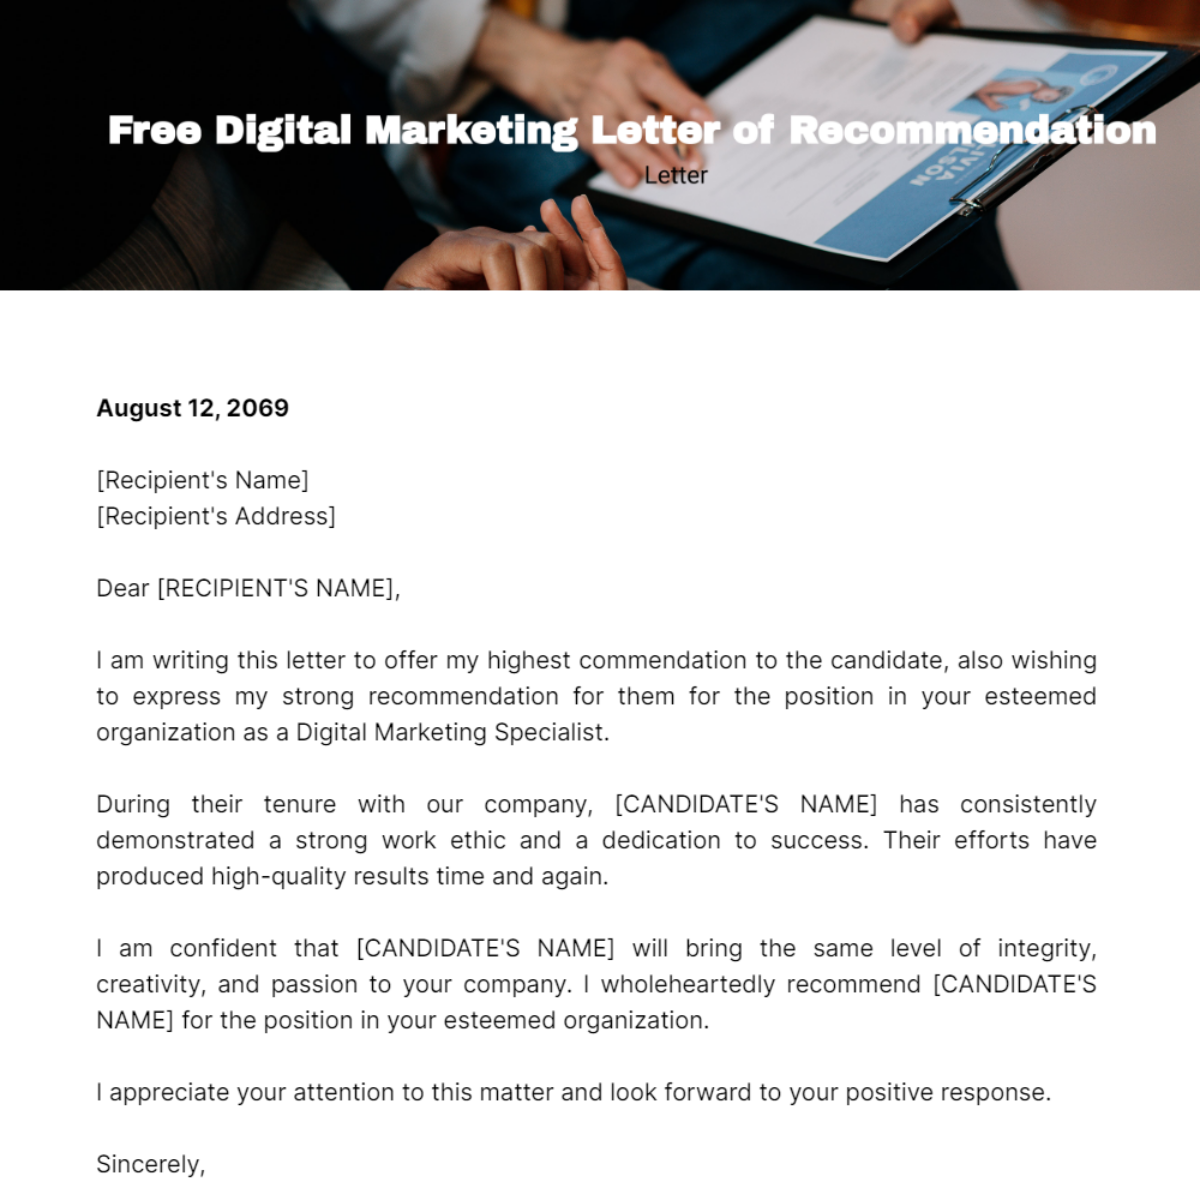 Digital Marketing Letter of Recommendation Template